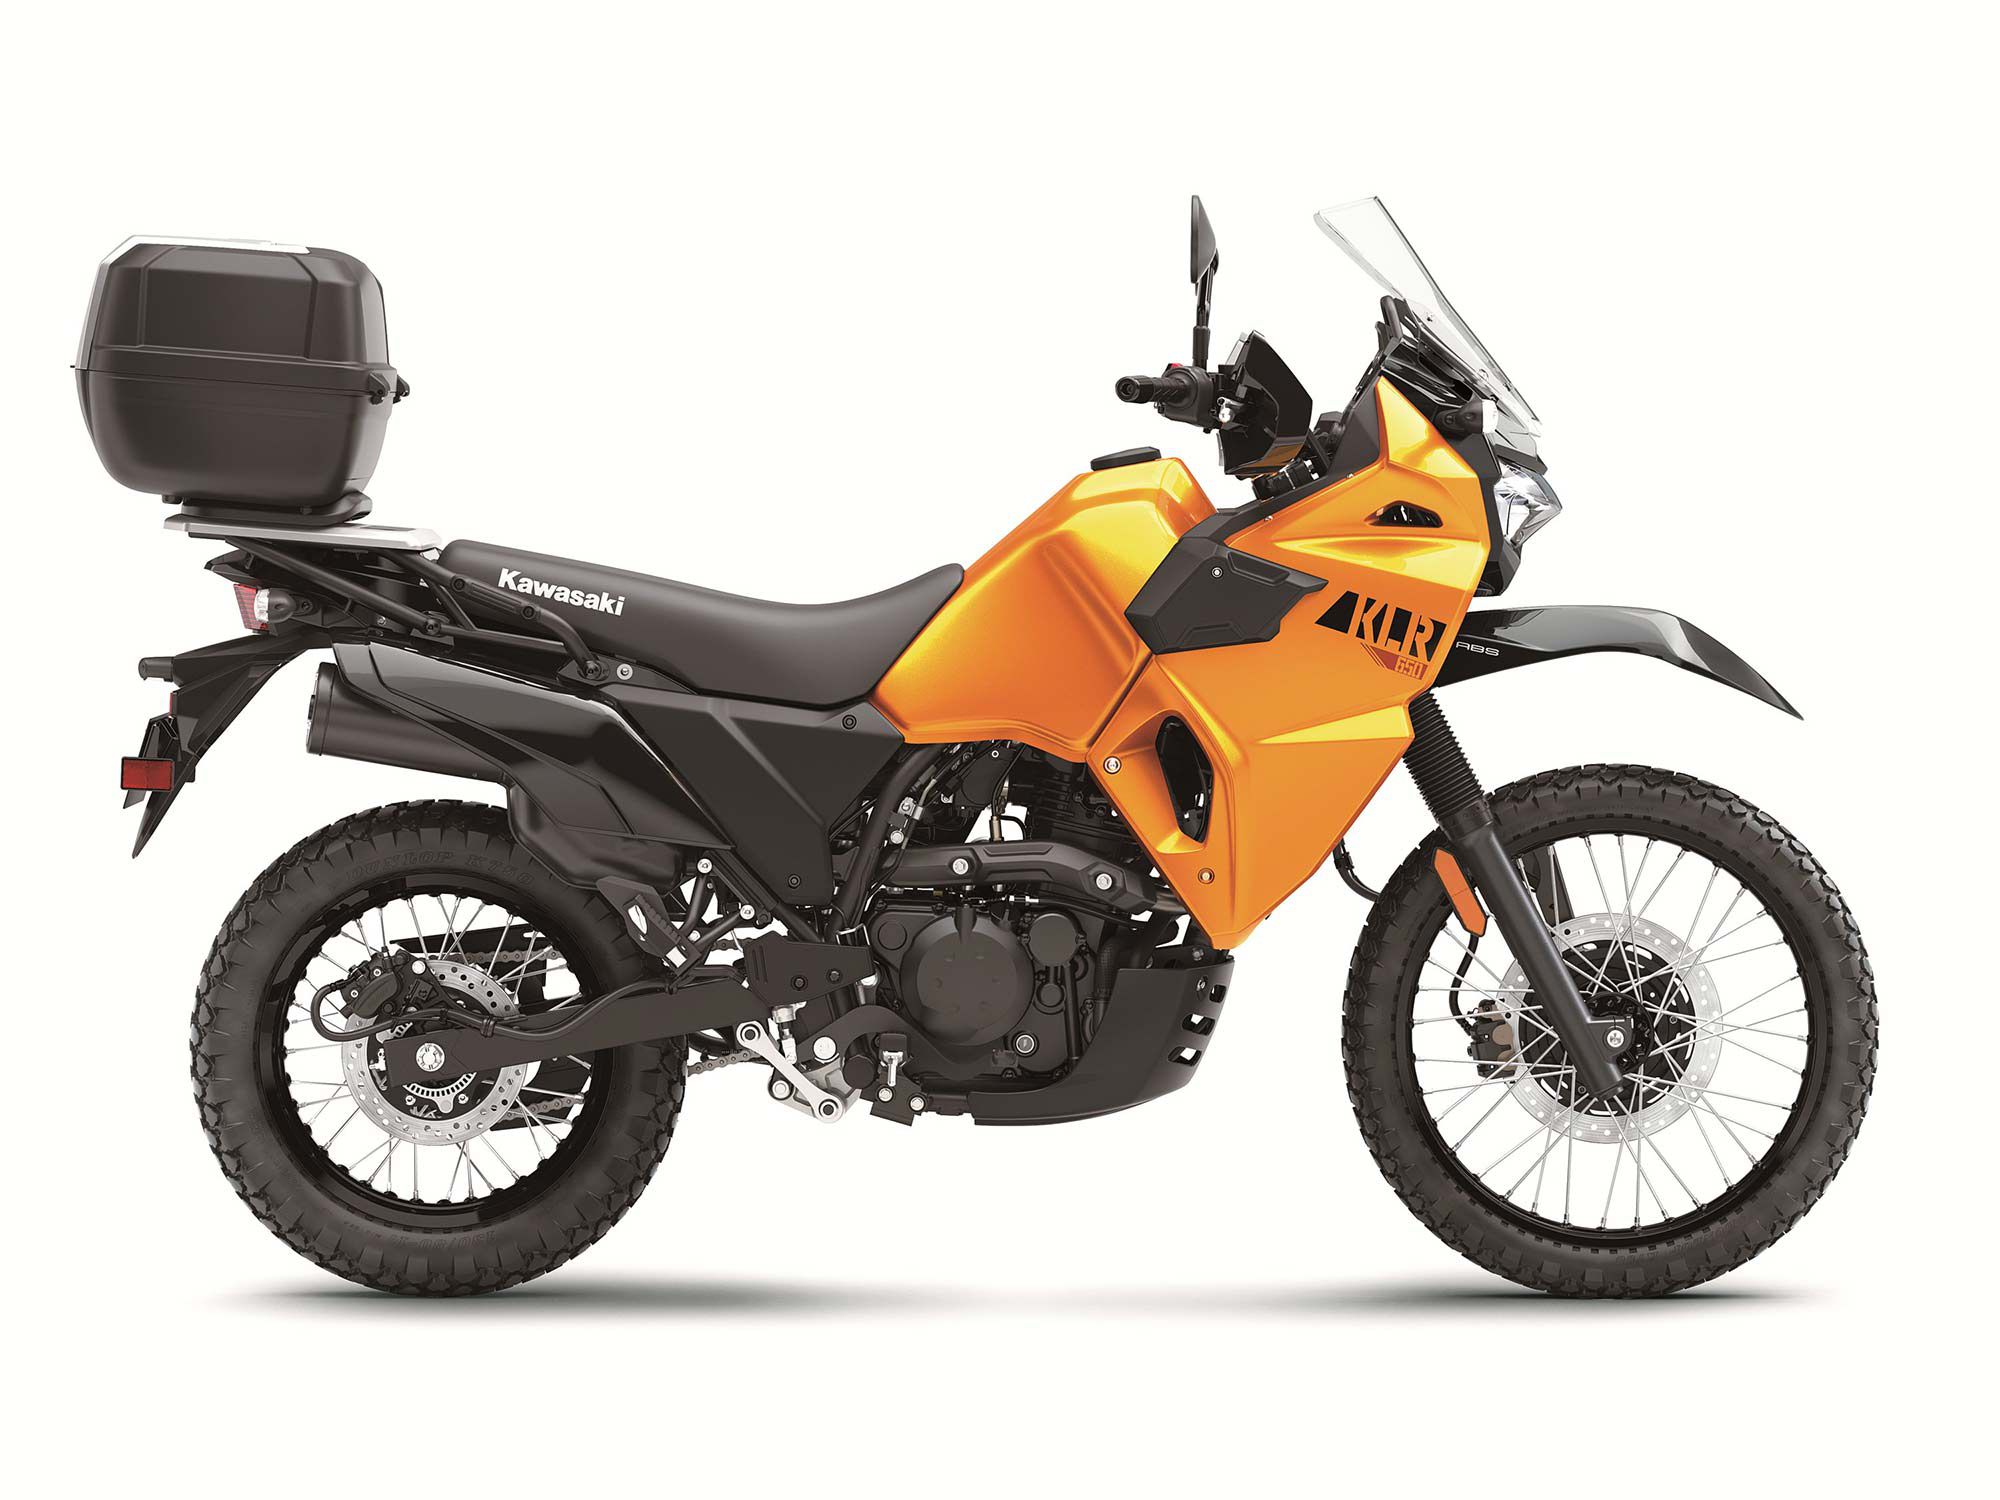 The Traveler is a trim that adds a hint of OE accessories to the base KLR.